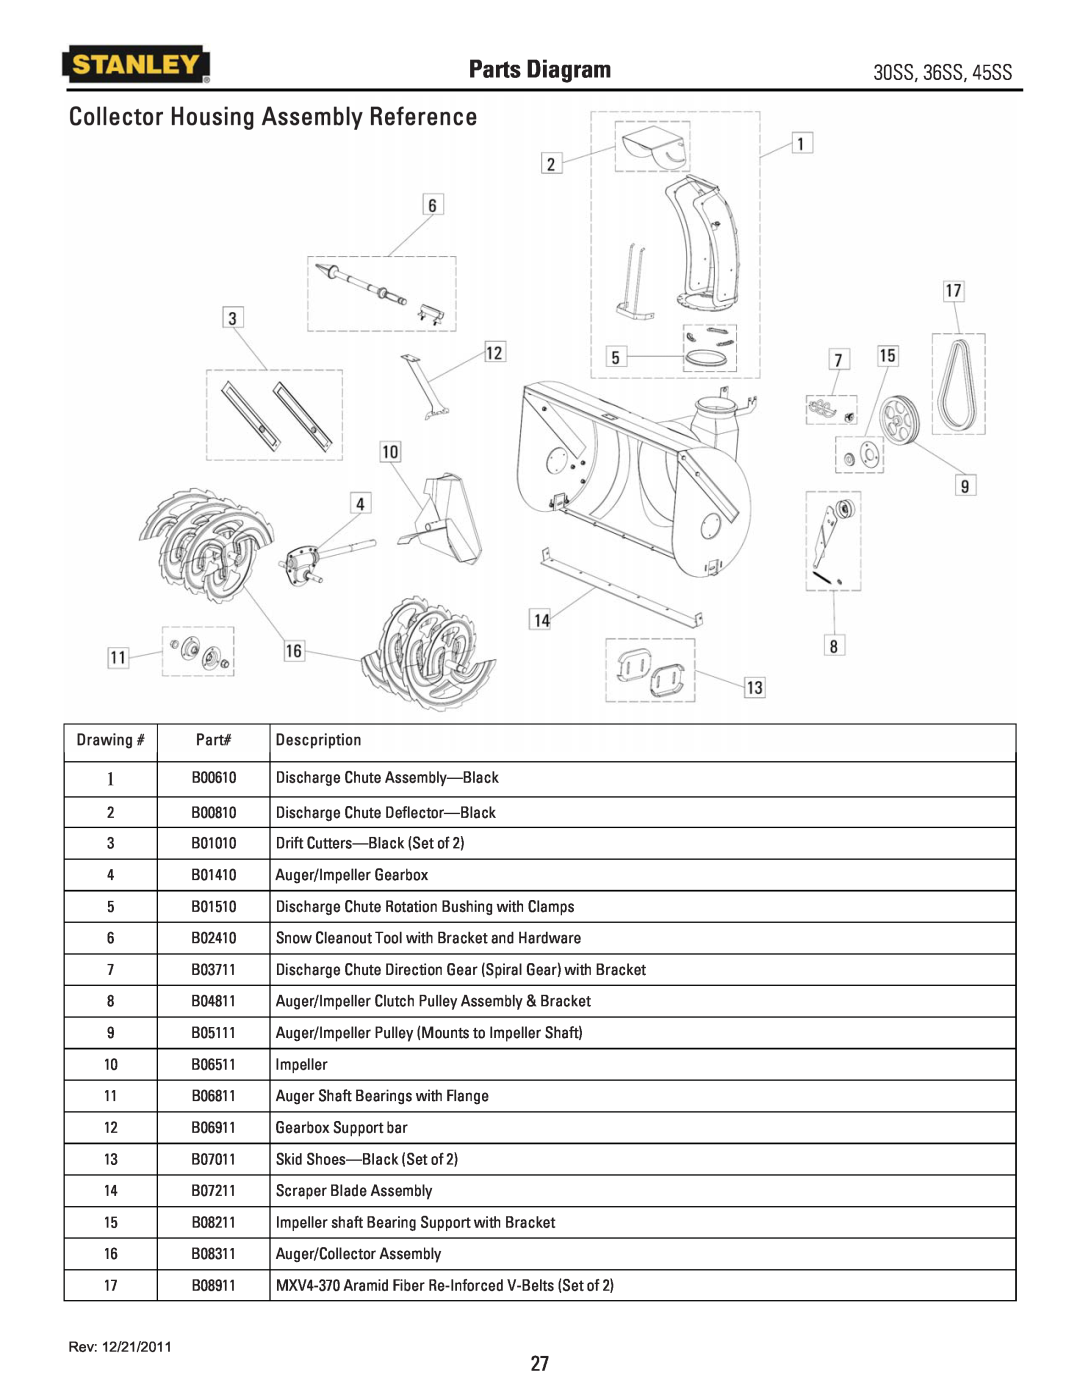 Stanley Black & Decker 45SS, 36SS, 30SS Parts Diagram, Collector Housing Assembly Reference, Drawing #, Part#, Descpription 